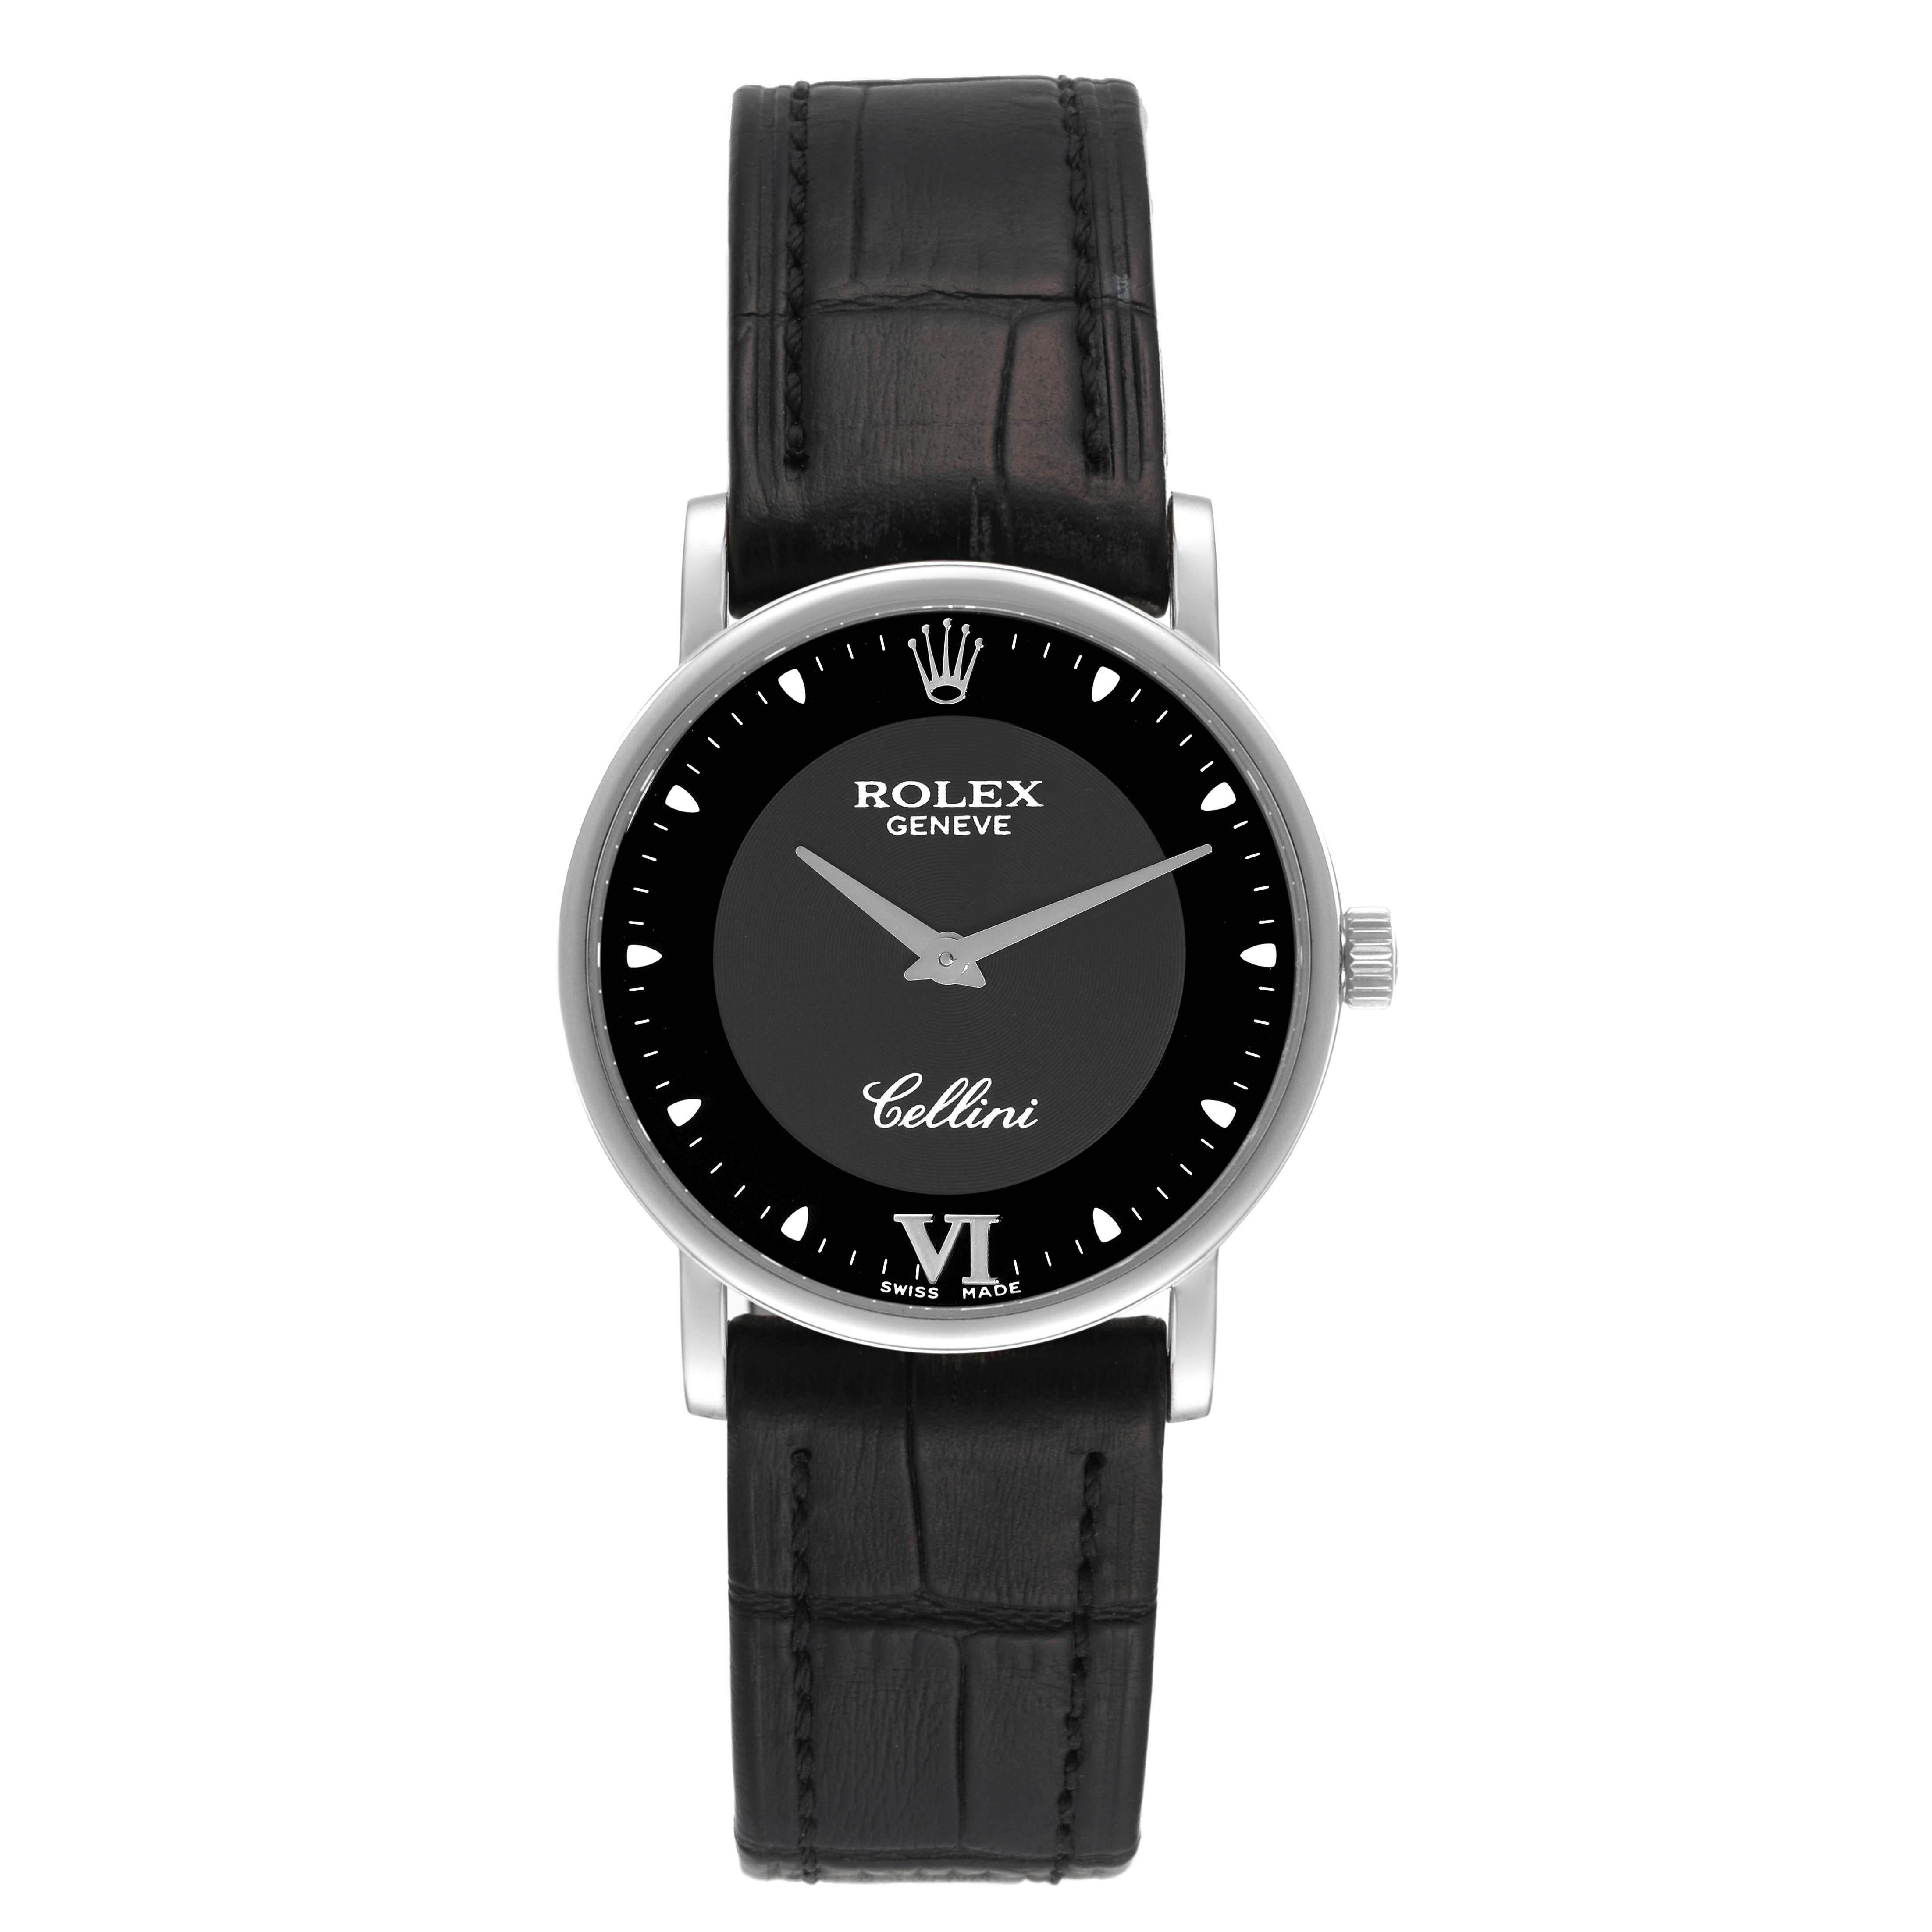 Rolex Cellini Classic 32mm White Gold Black Dial Mens Watch 5115. Manual winding movement. 18K white gold slim case 31.8 x 5.5 mm in diameter. Rolex logo on a crown. . Scratch resistant sapphire crystal. Flat profile. Black dial with dot hour